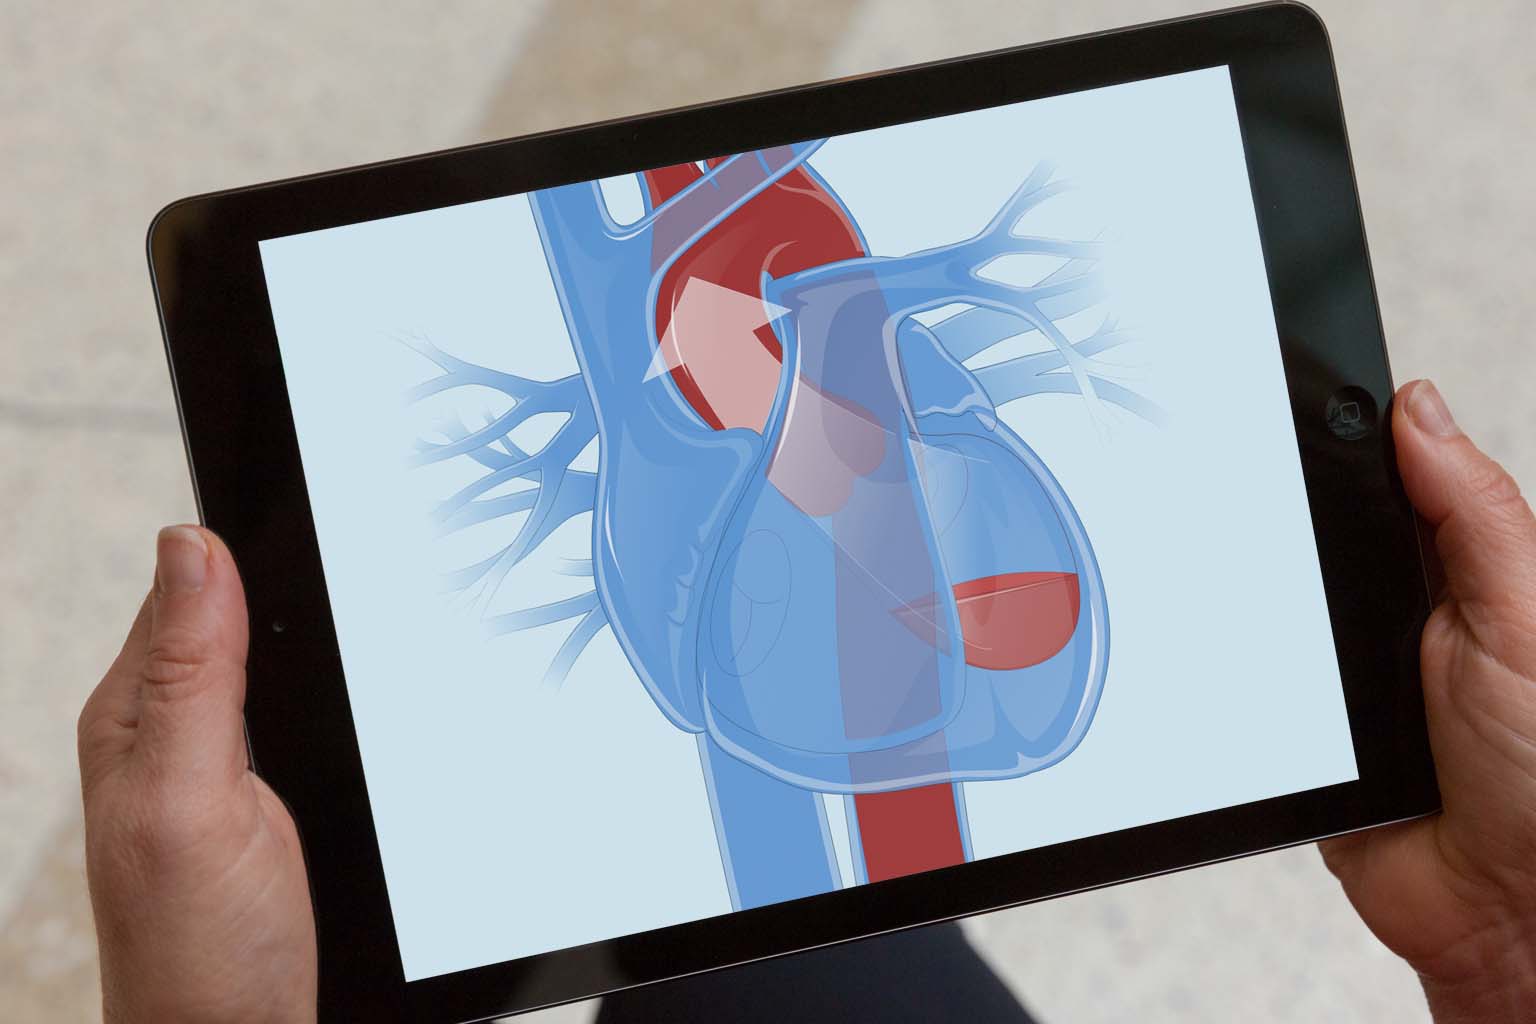 patient viewing heart illustration on a tablet